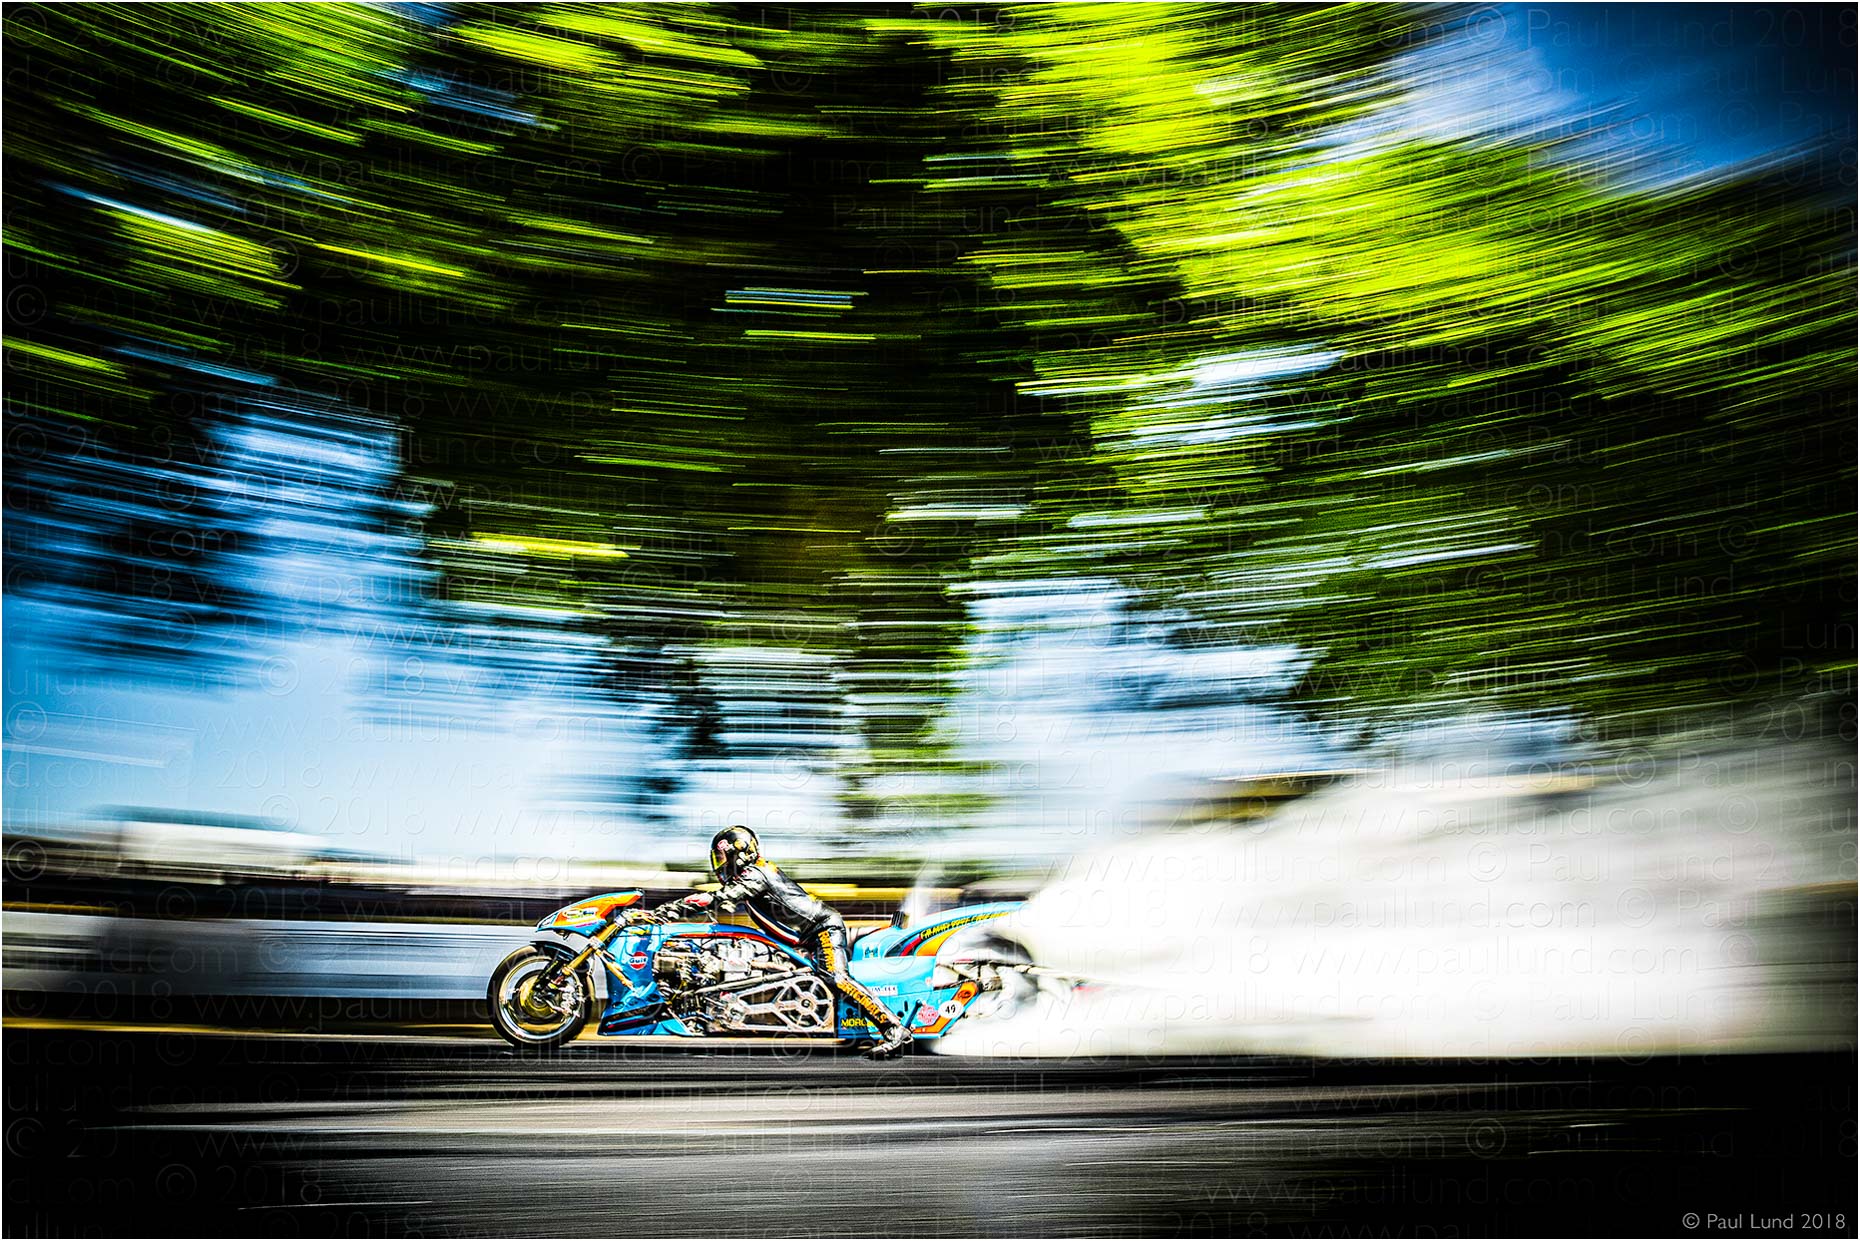 Puma Gulf Supercharged Drag Bike - Rider: Ian King at Goodwood Festival of Speed 2018. Photographer: Paul Lund